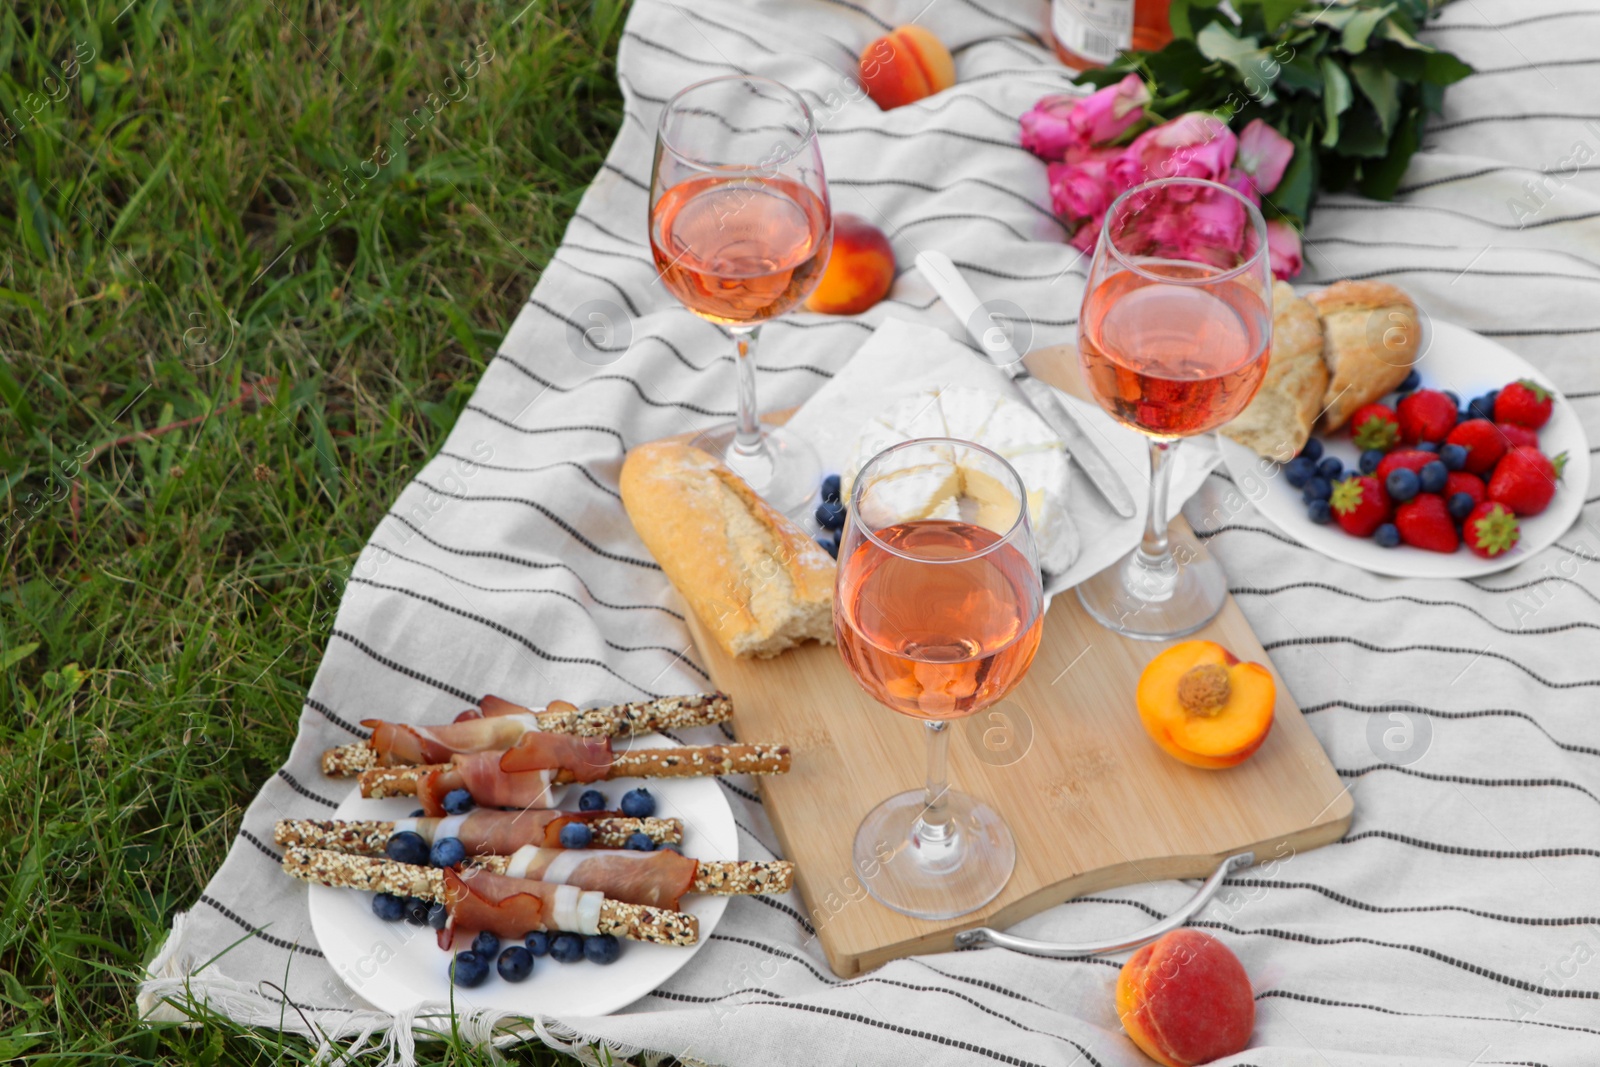 Photo of Glasses of delicious rose wine, flowers and food on picnic blanket outdoors